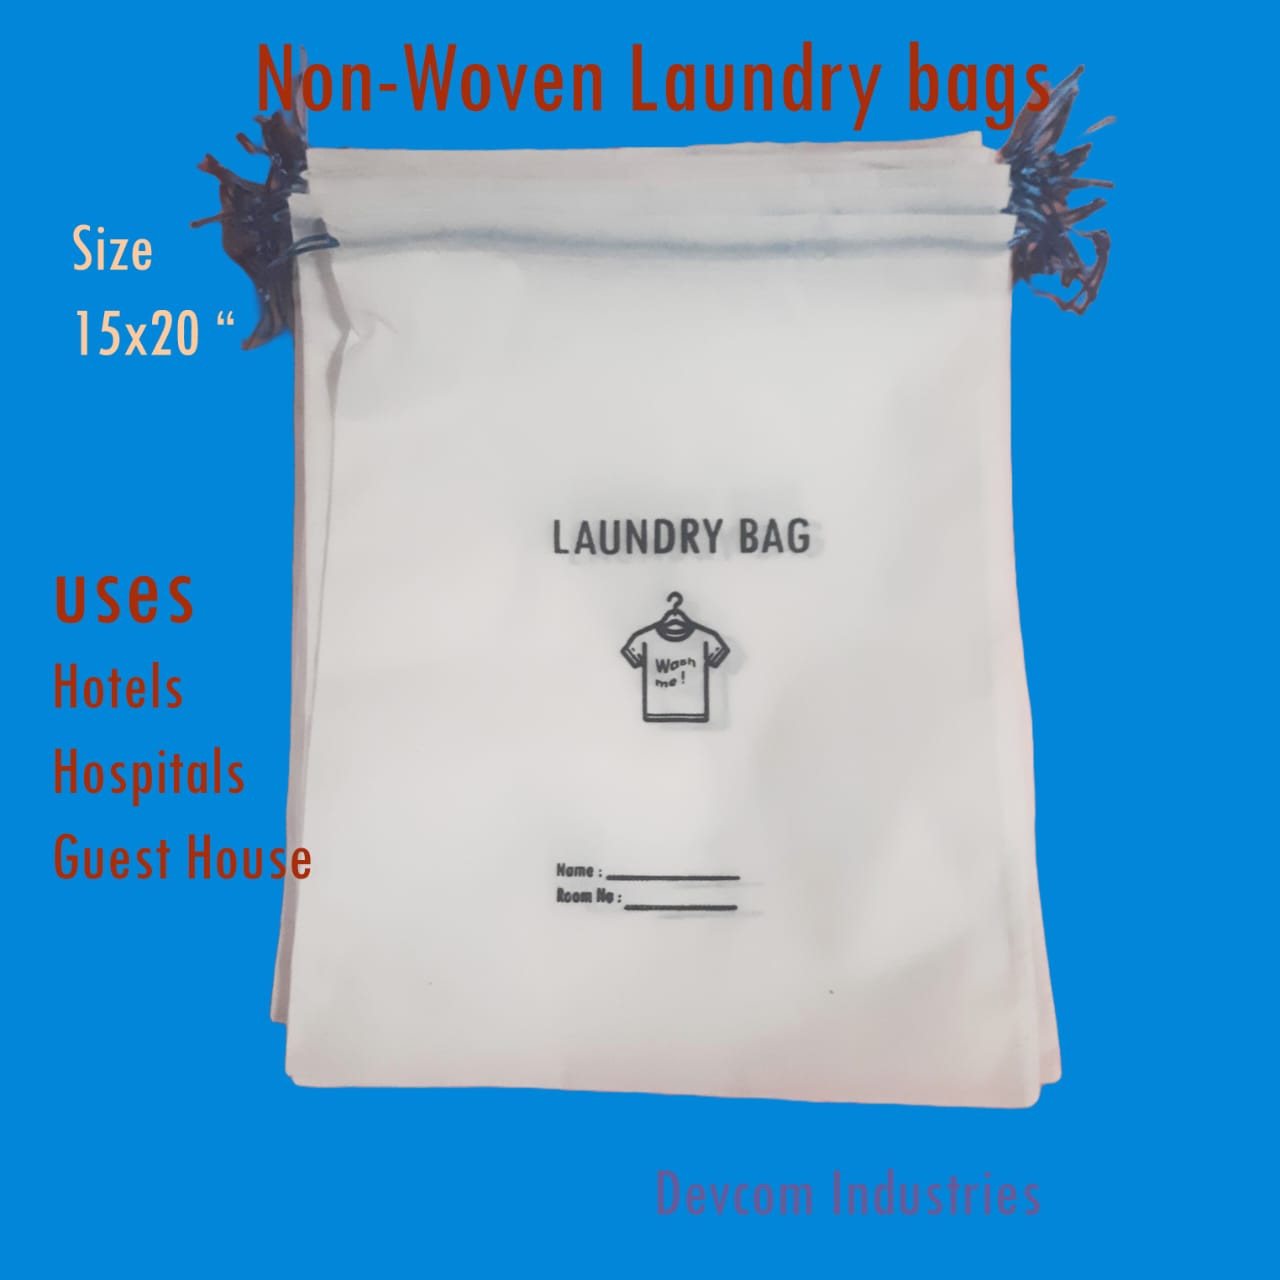 Laundry bags -Non-Woven Laundry bags for Hotels-Resorts-Guest Houses